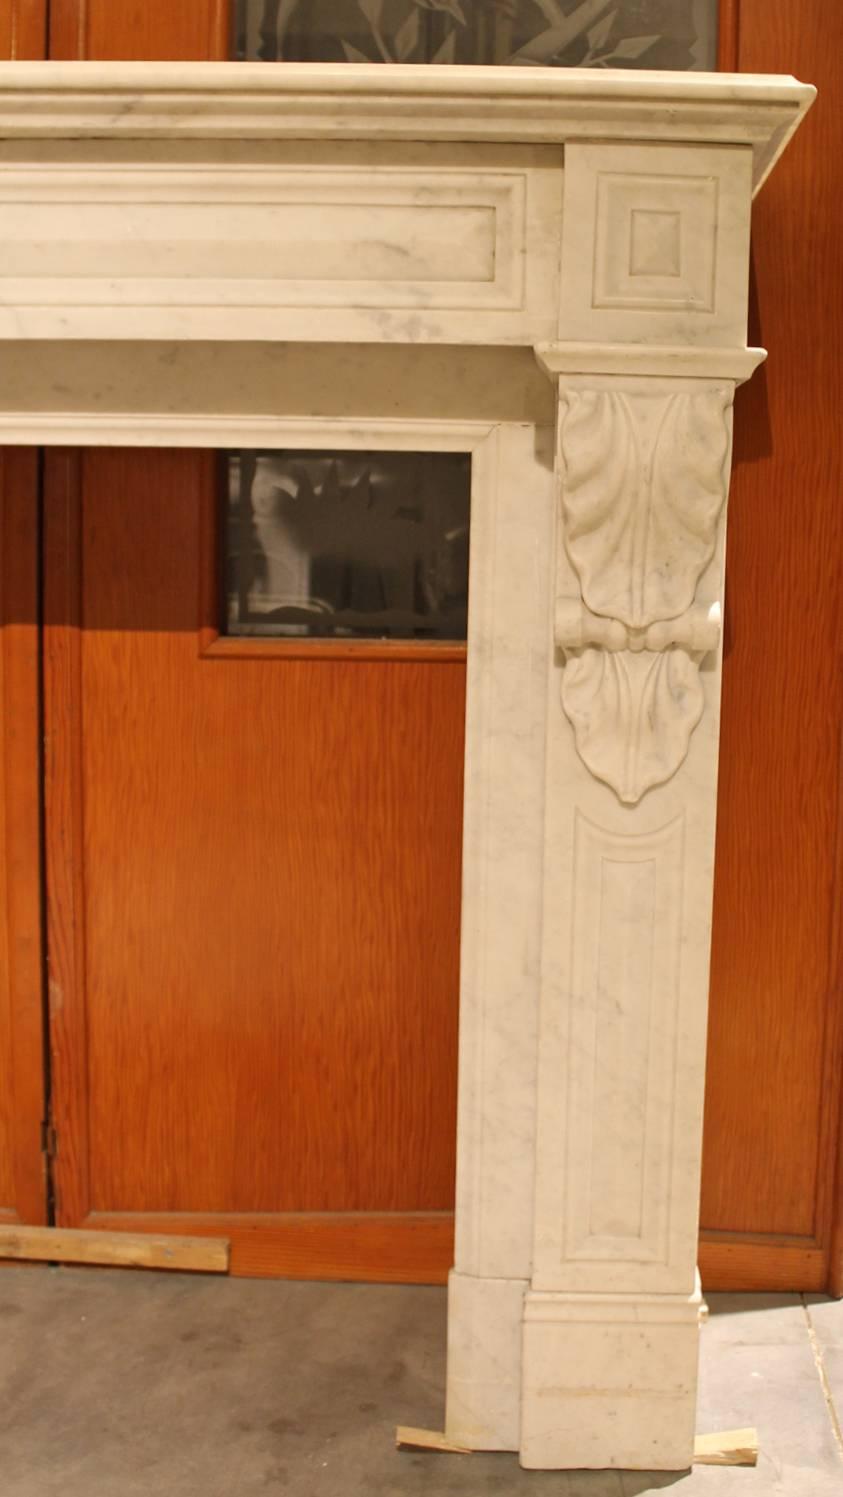 Carrara Marble Antique White Marble Fireplace mantel from the 19th Century